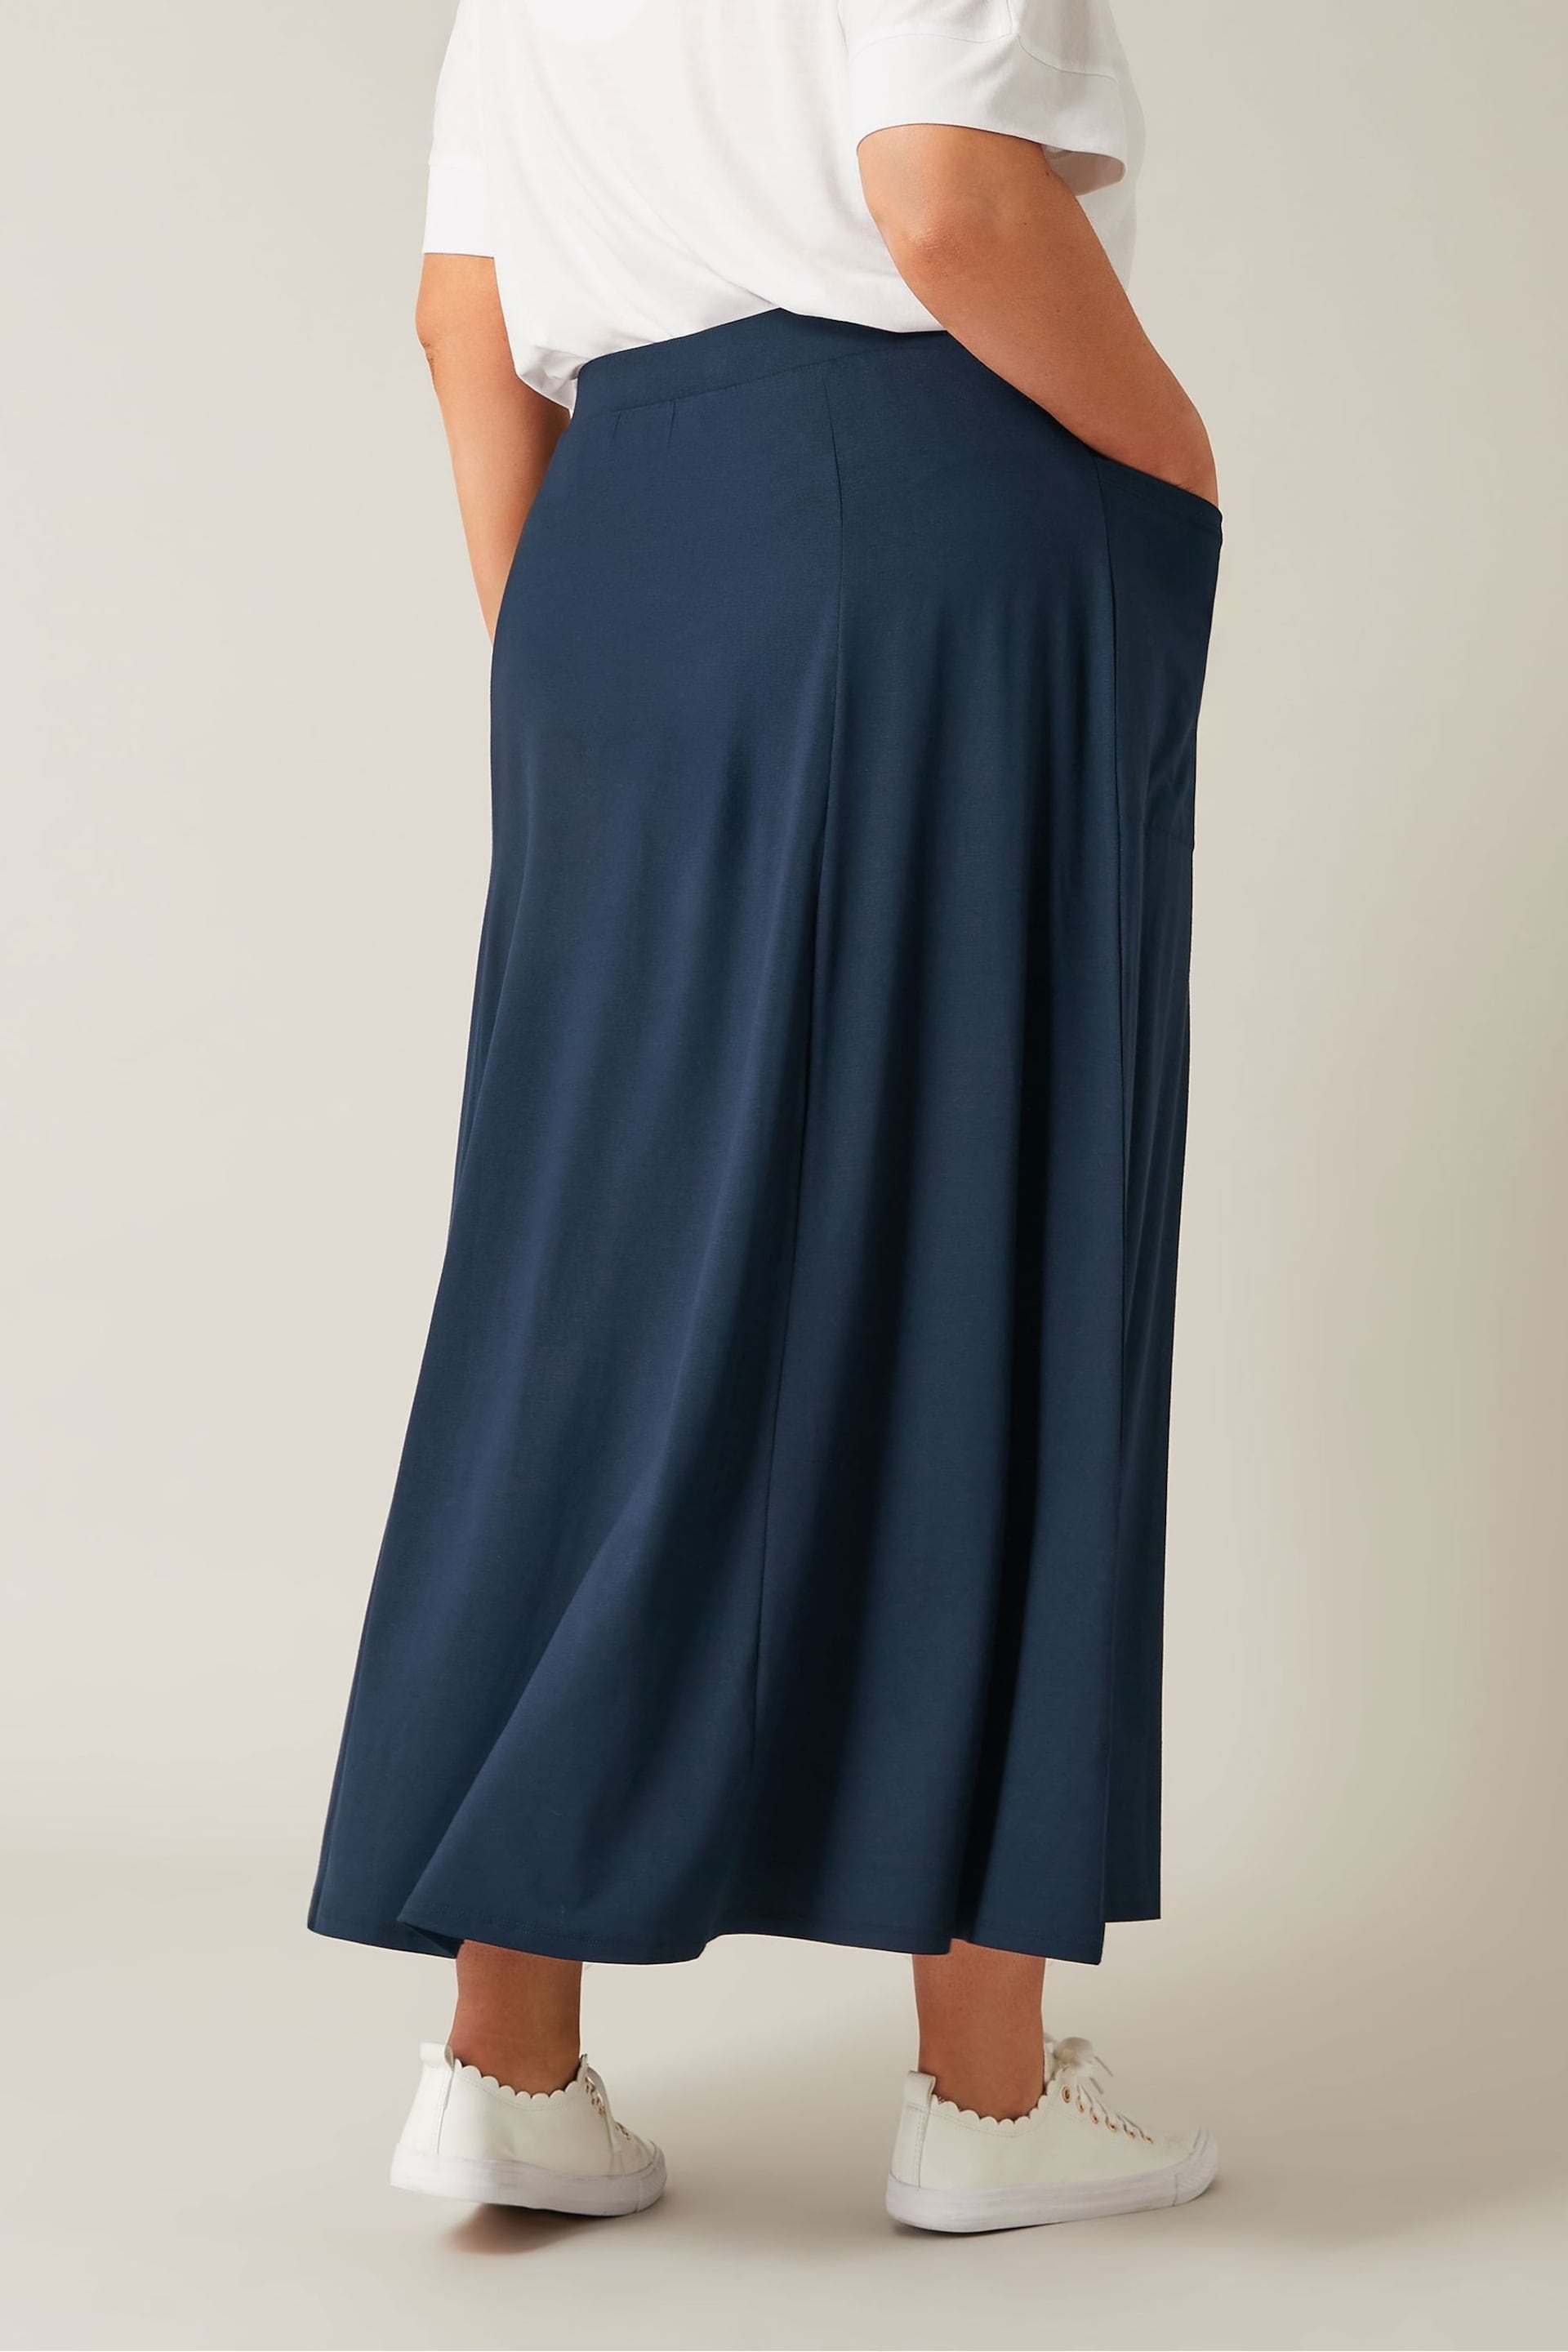 Evans Curve Maxi Skirt - Image 3 of 5